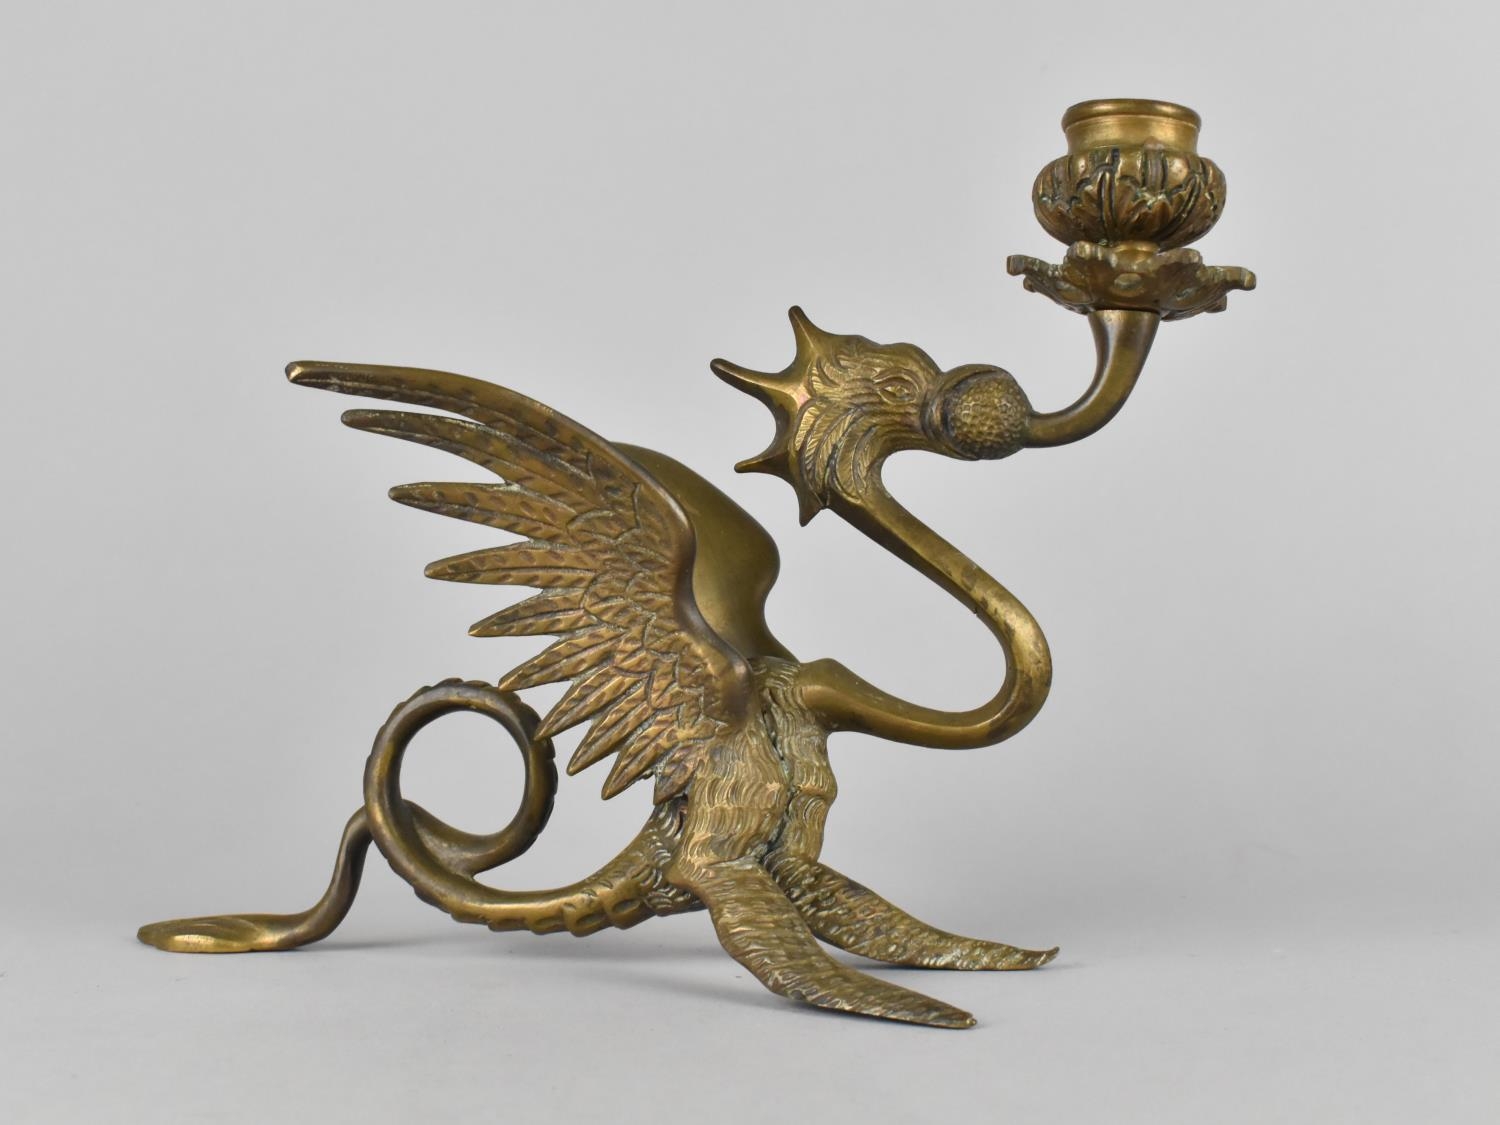 An Ornate Brass Candlestick Modelled as a Winged Griffin, 16cms High